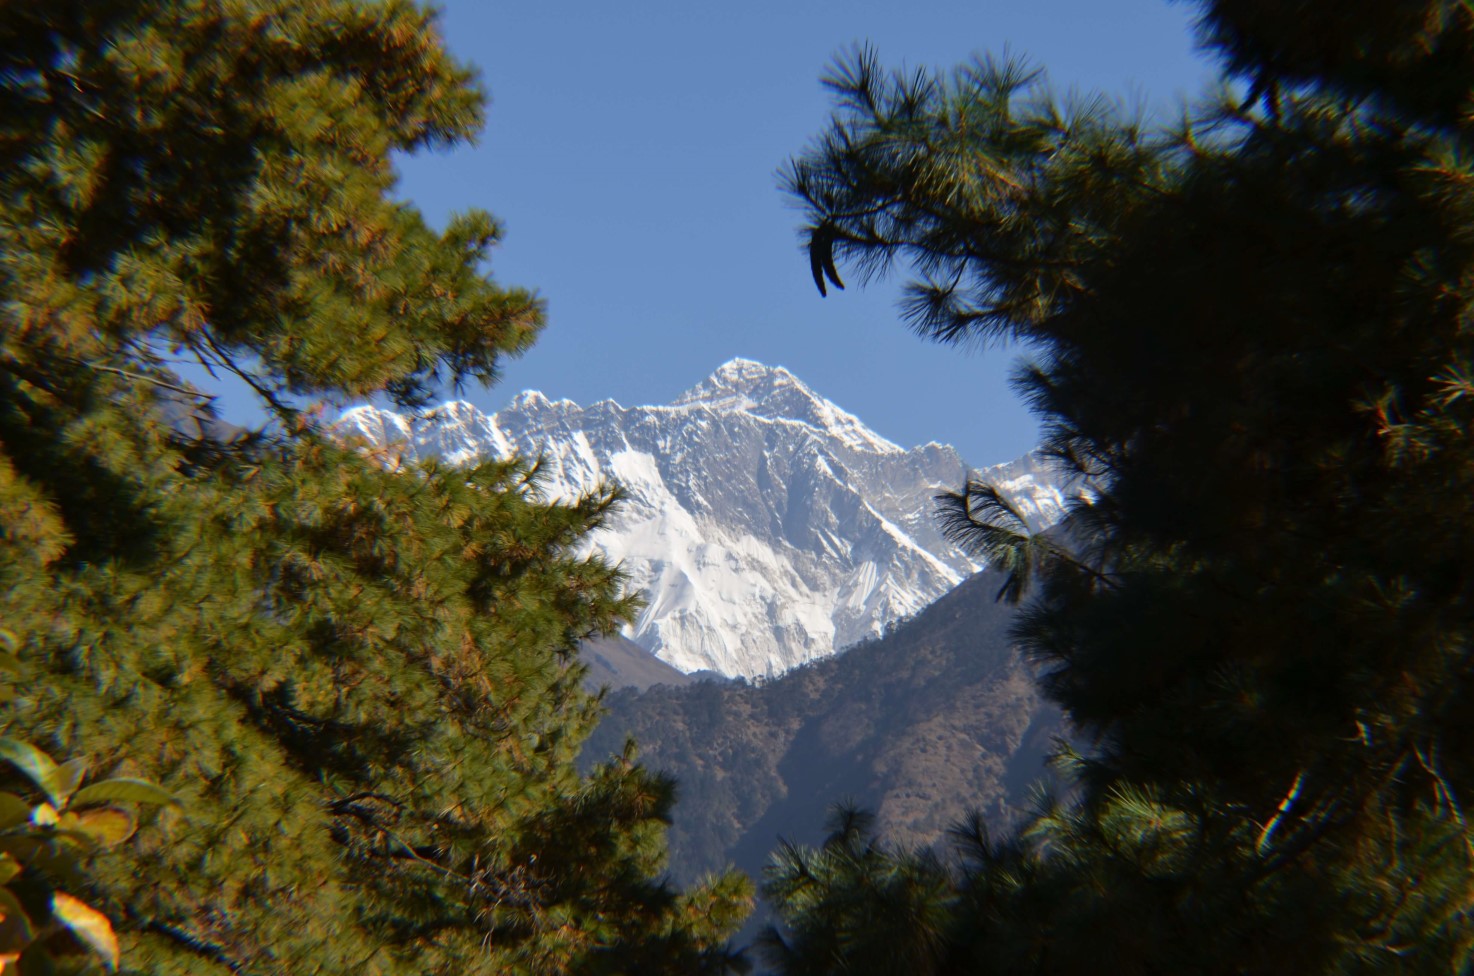 Glimpse of Mt. Everest